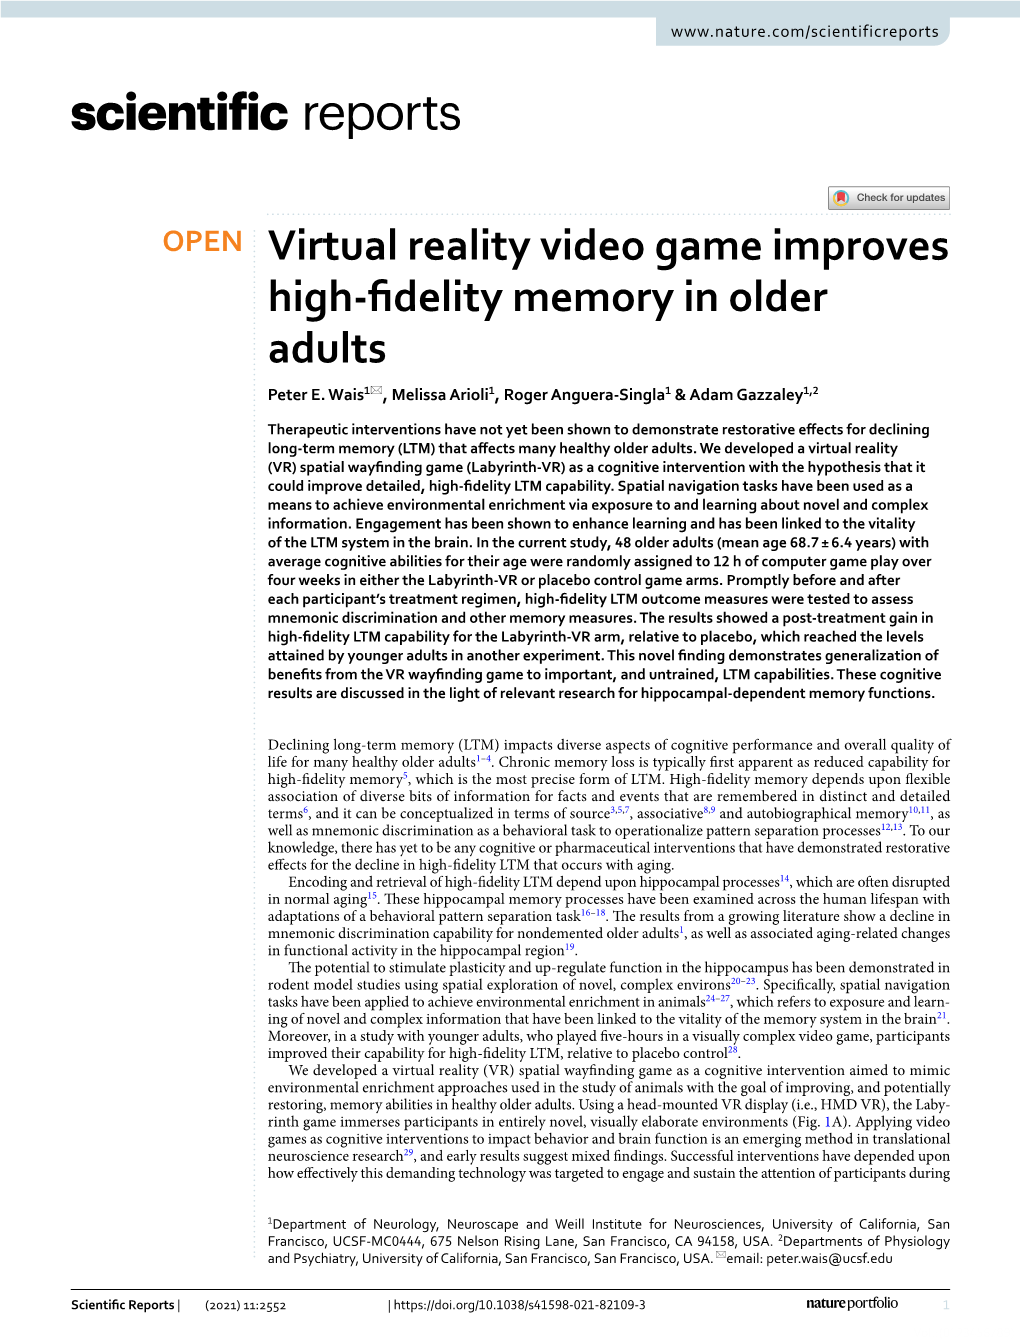 Virtual Reality Video Game Improves High-Fidelity Memory in Older Adults